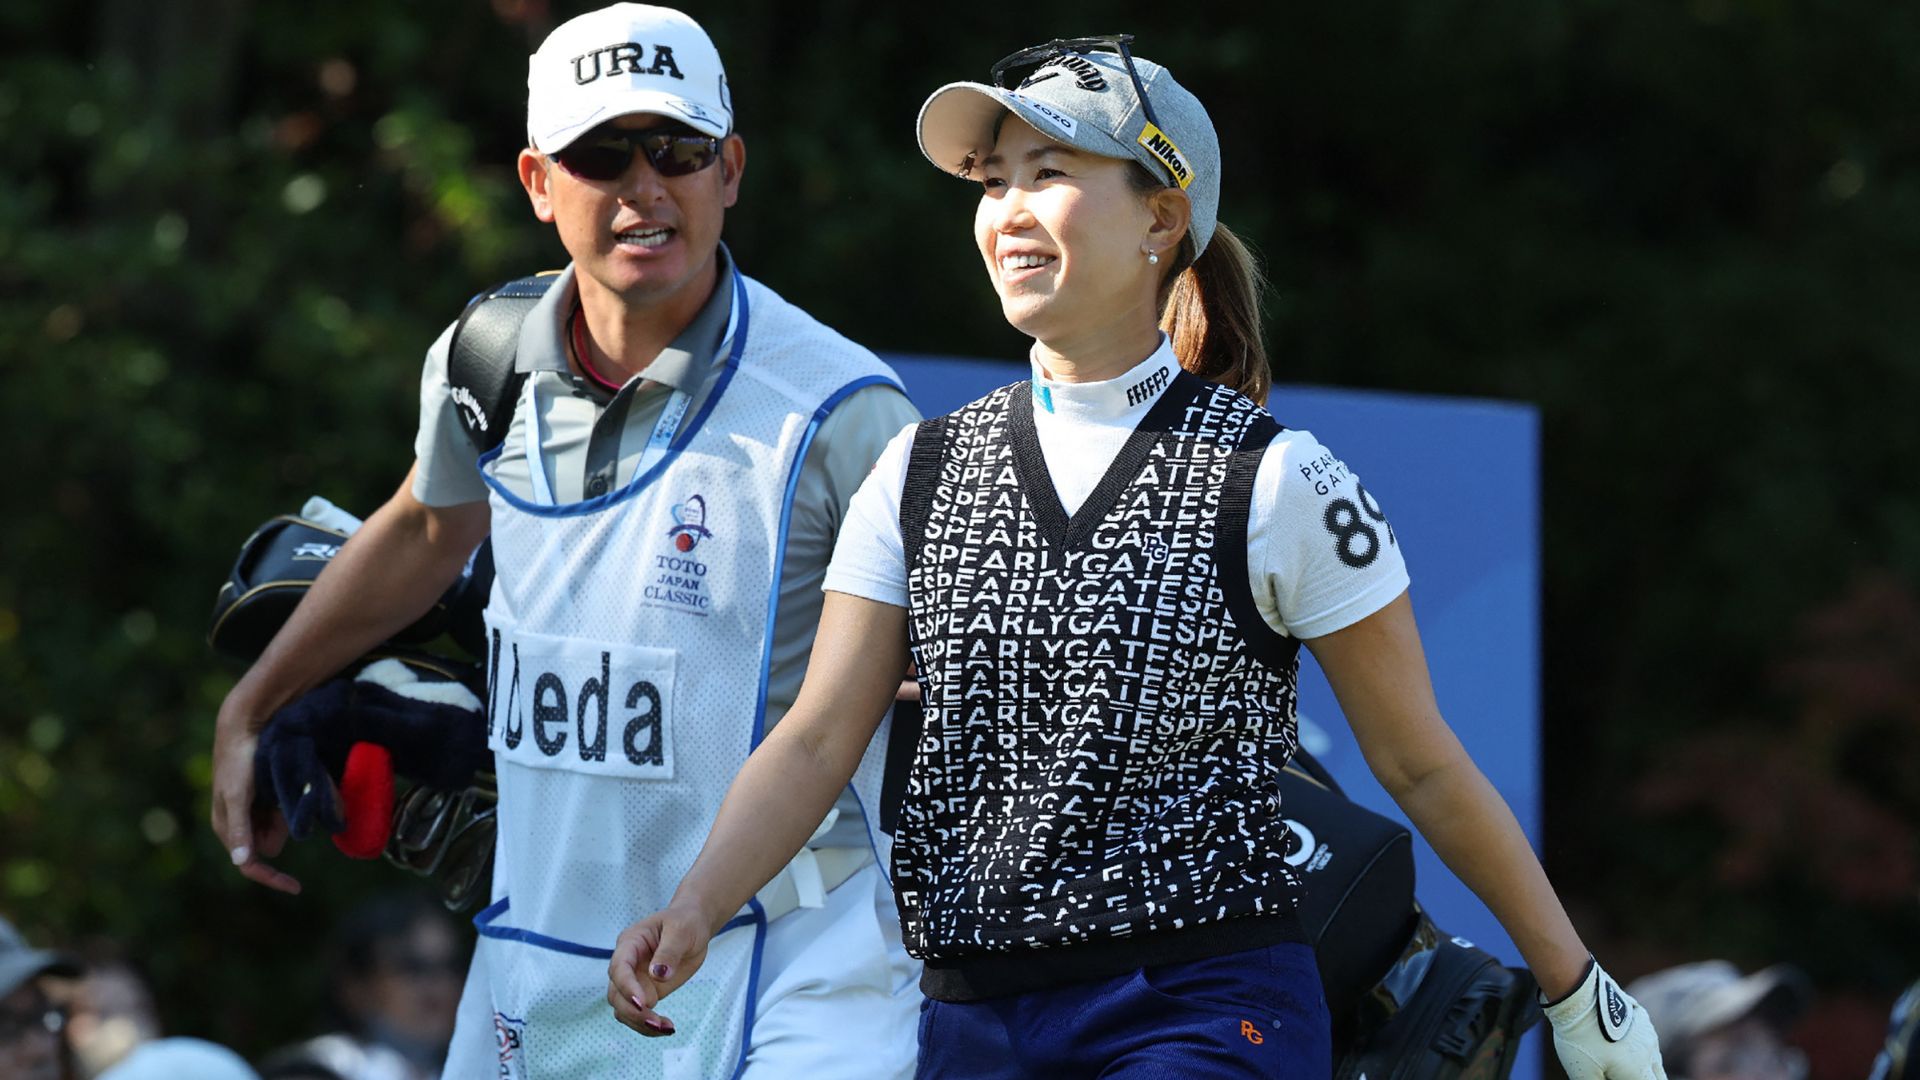 Changes pay off for Toto Japan leaders; Atthaya Thitikul shoot 71 as No. 1